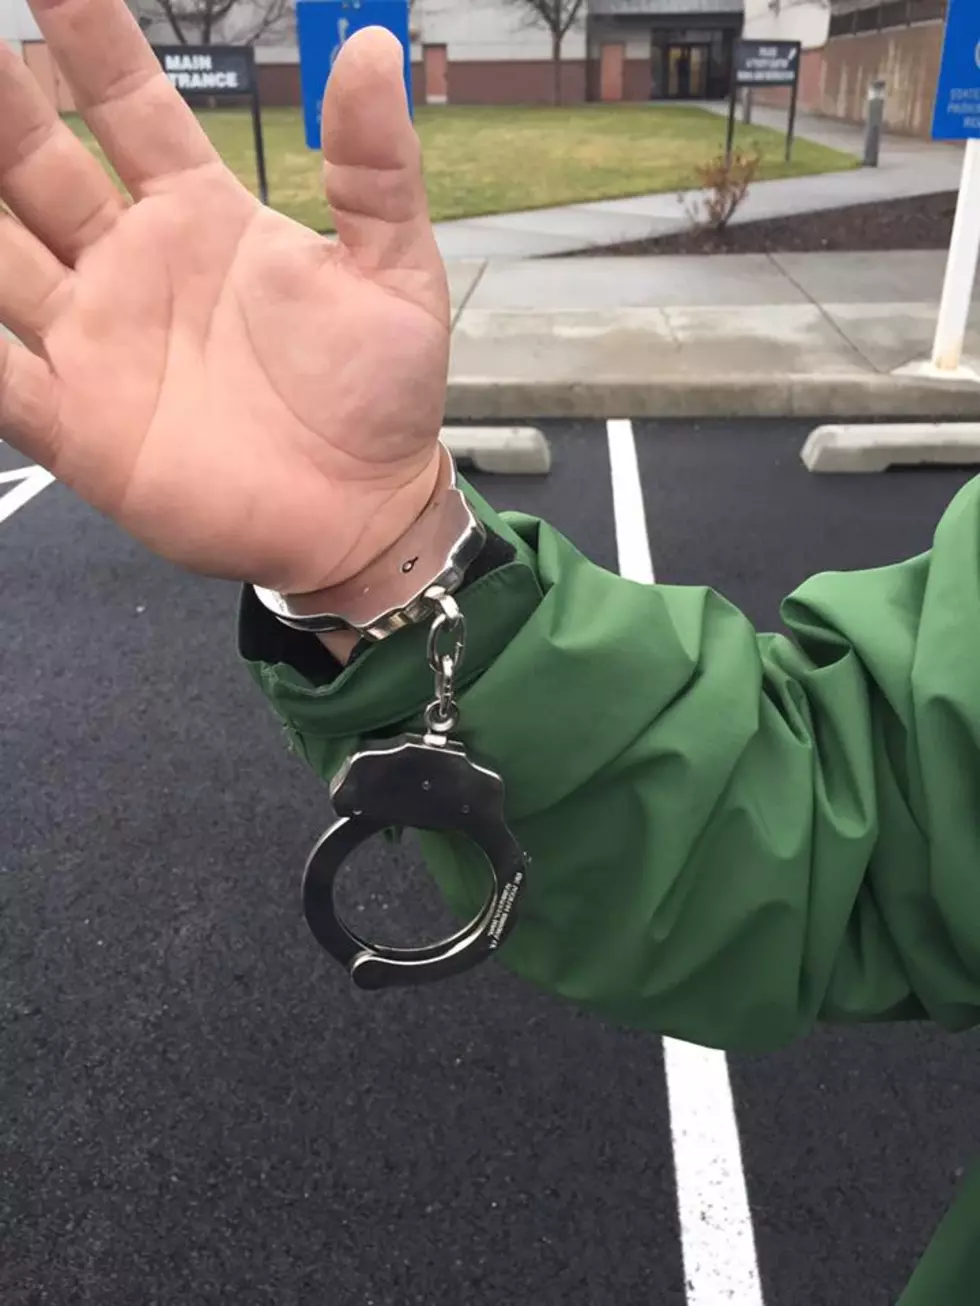 If You Own Handcuffs, Make Sure You Have the Key!